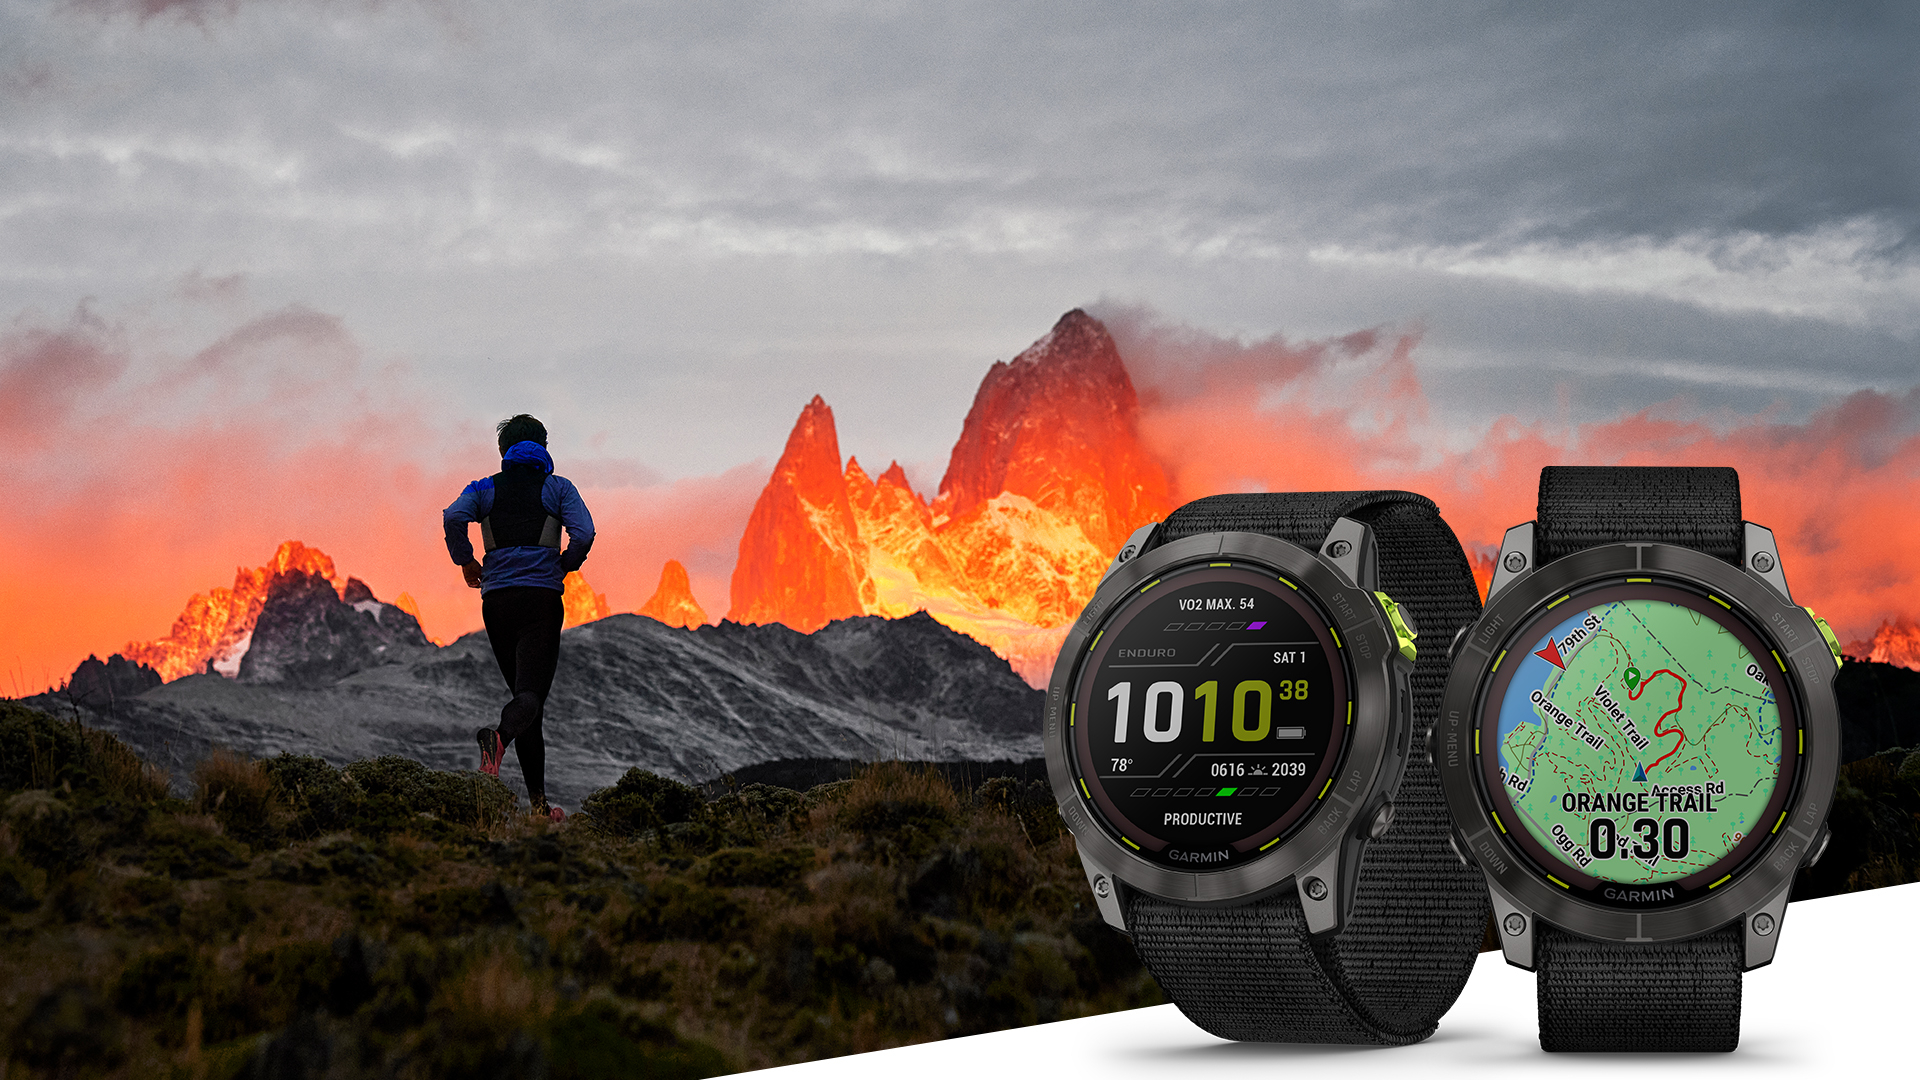 Garmin releases Edge Explore 2 GPS with battery life up to 24 hours